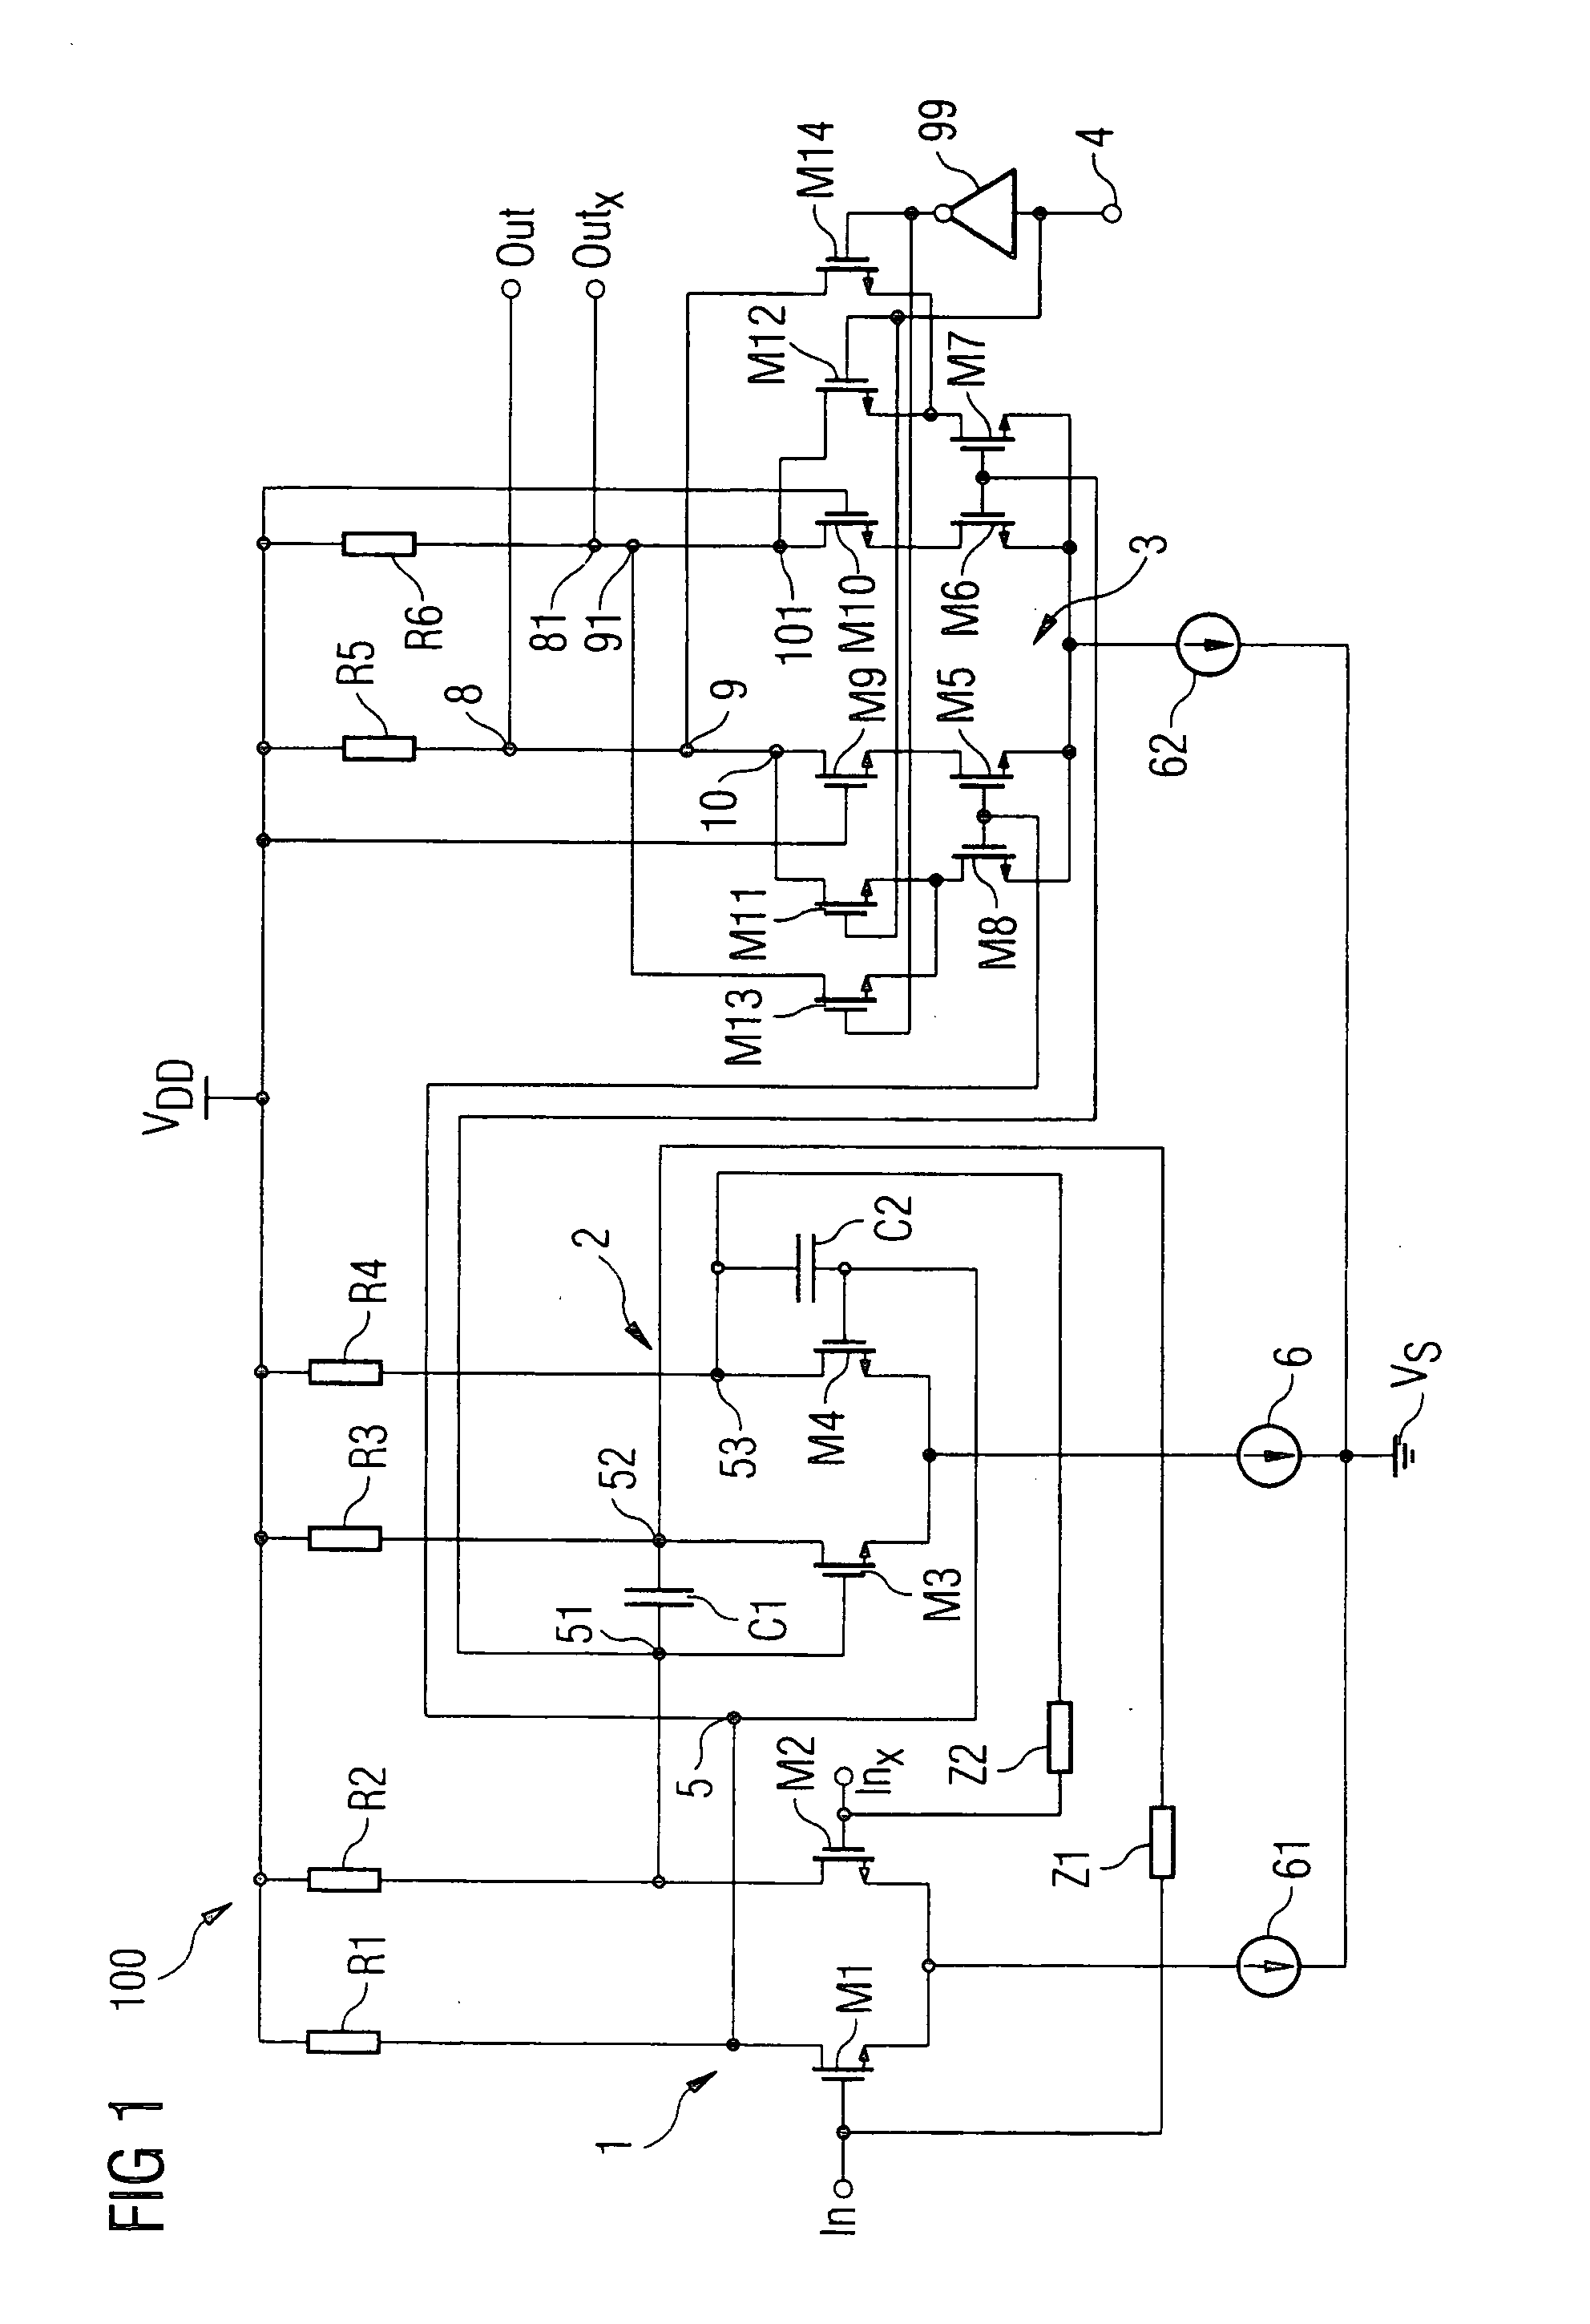 Amplifier arrangement having an adjustable gain, and use thereof